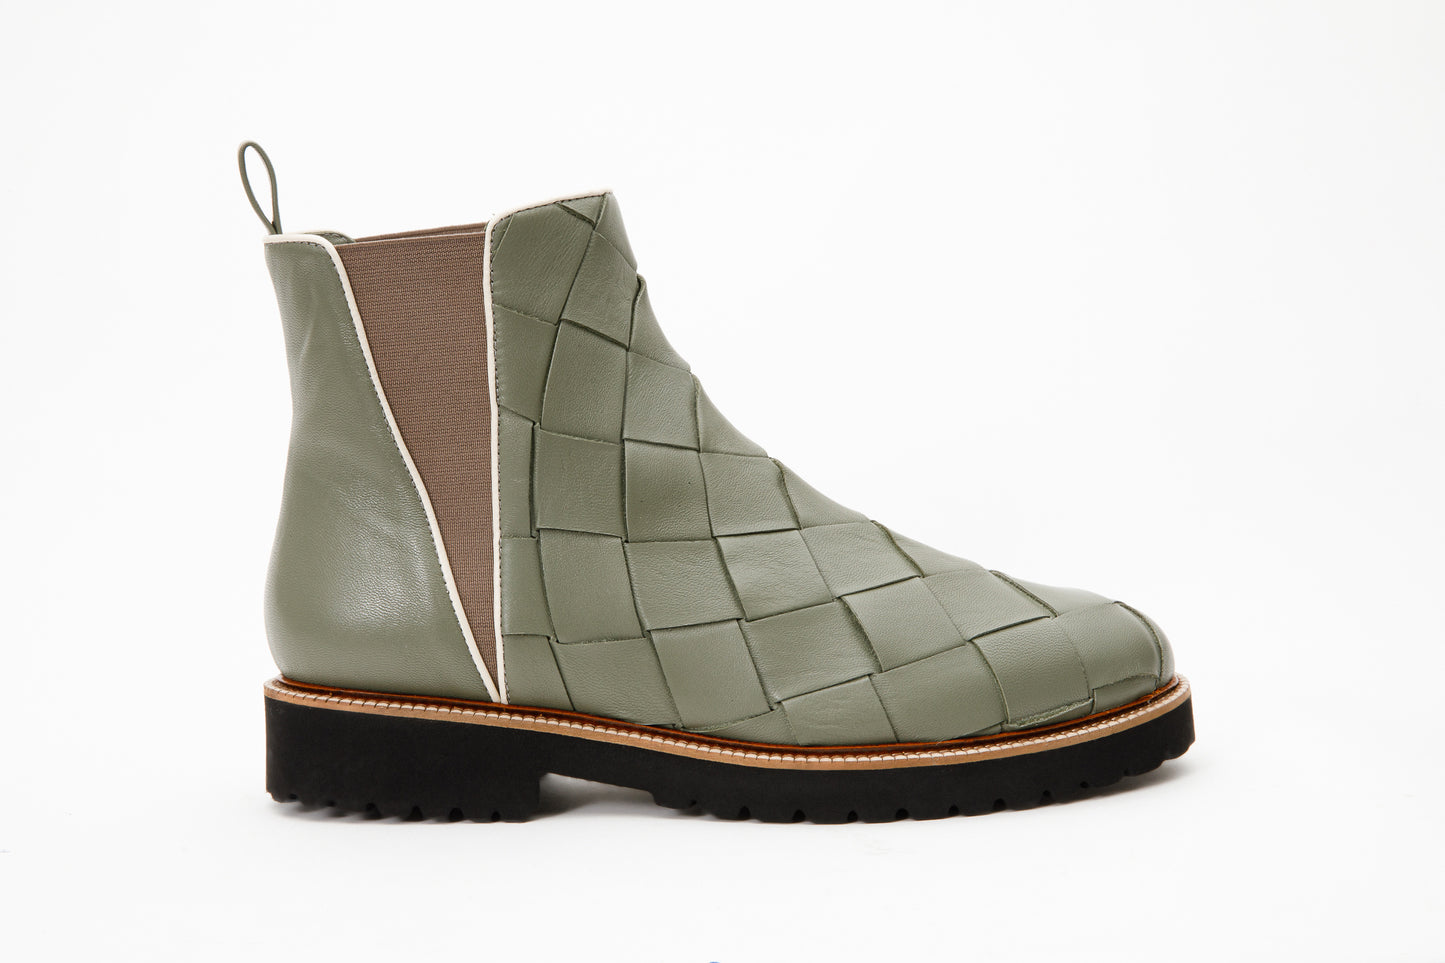 The Luisina Green Handwoven Leather Ankle Boot Final Sale!